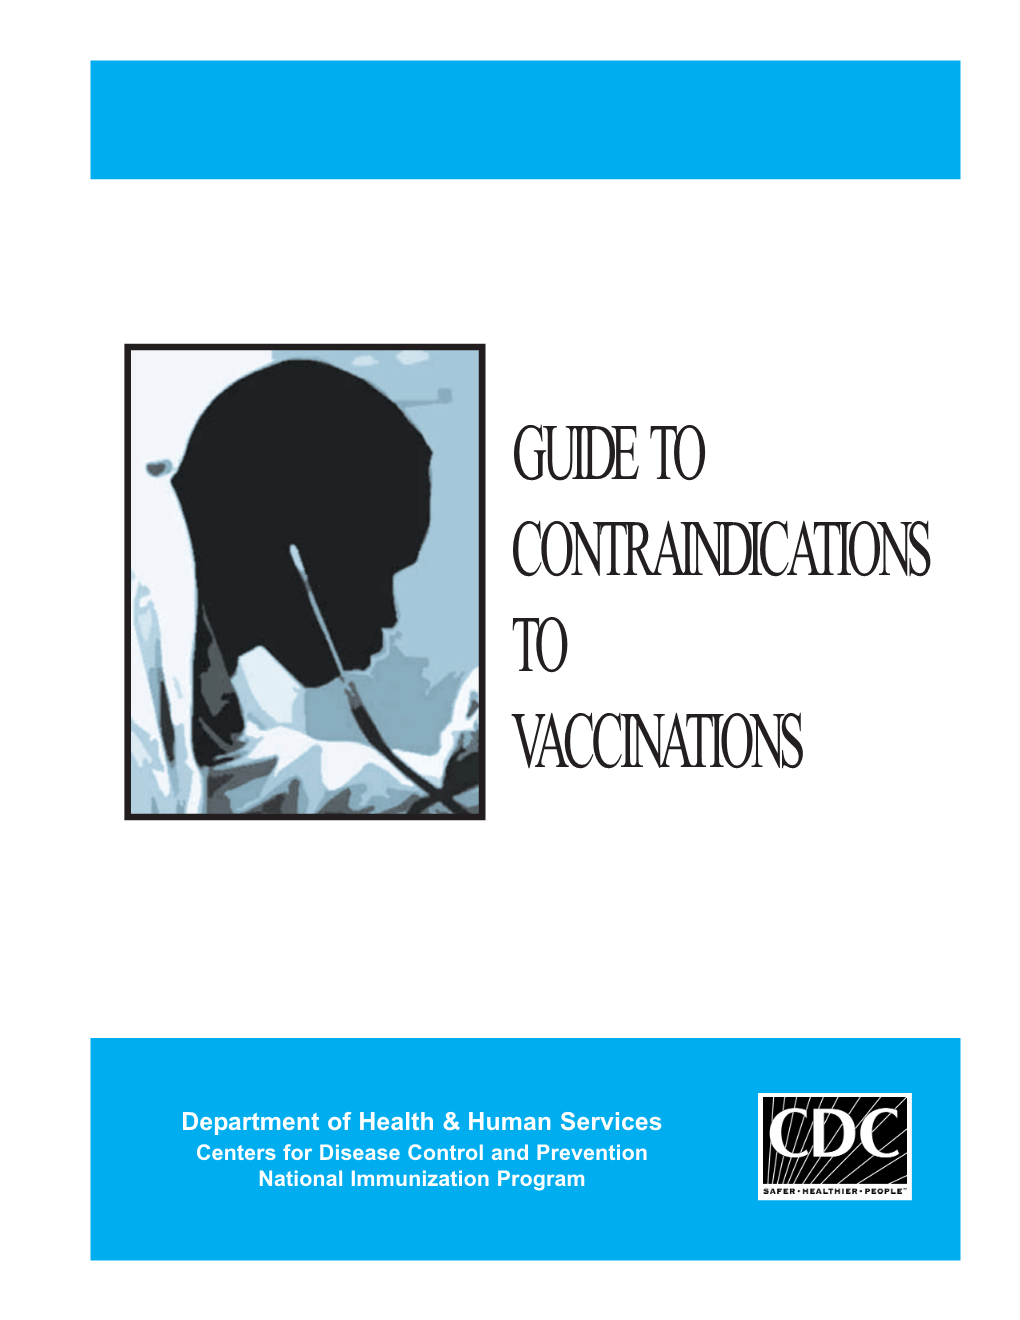 Guide to Contraindications to Vaccinations